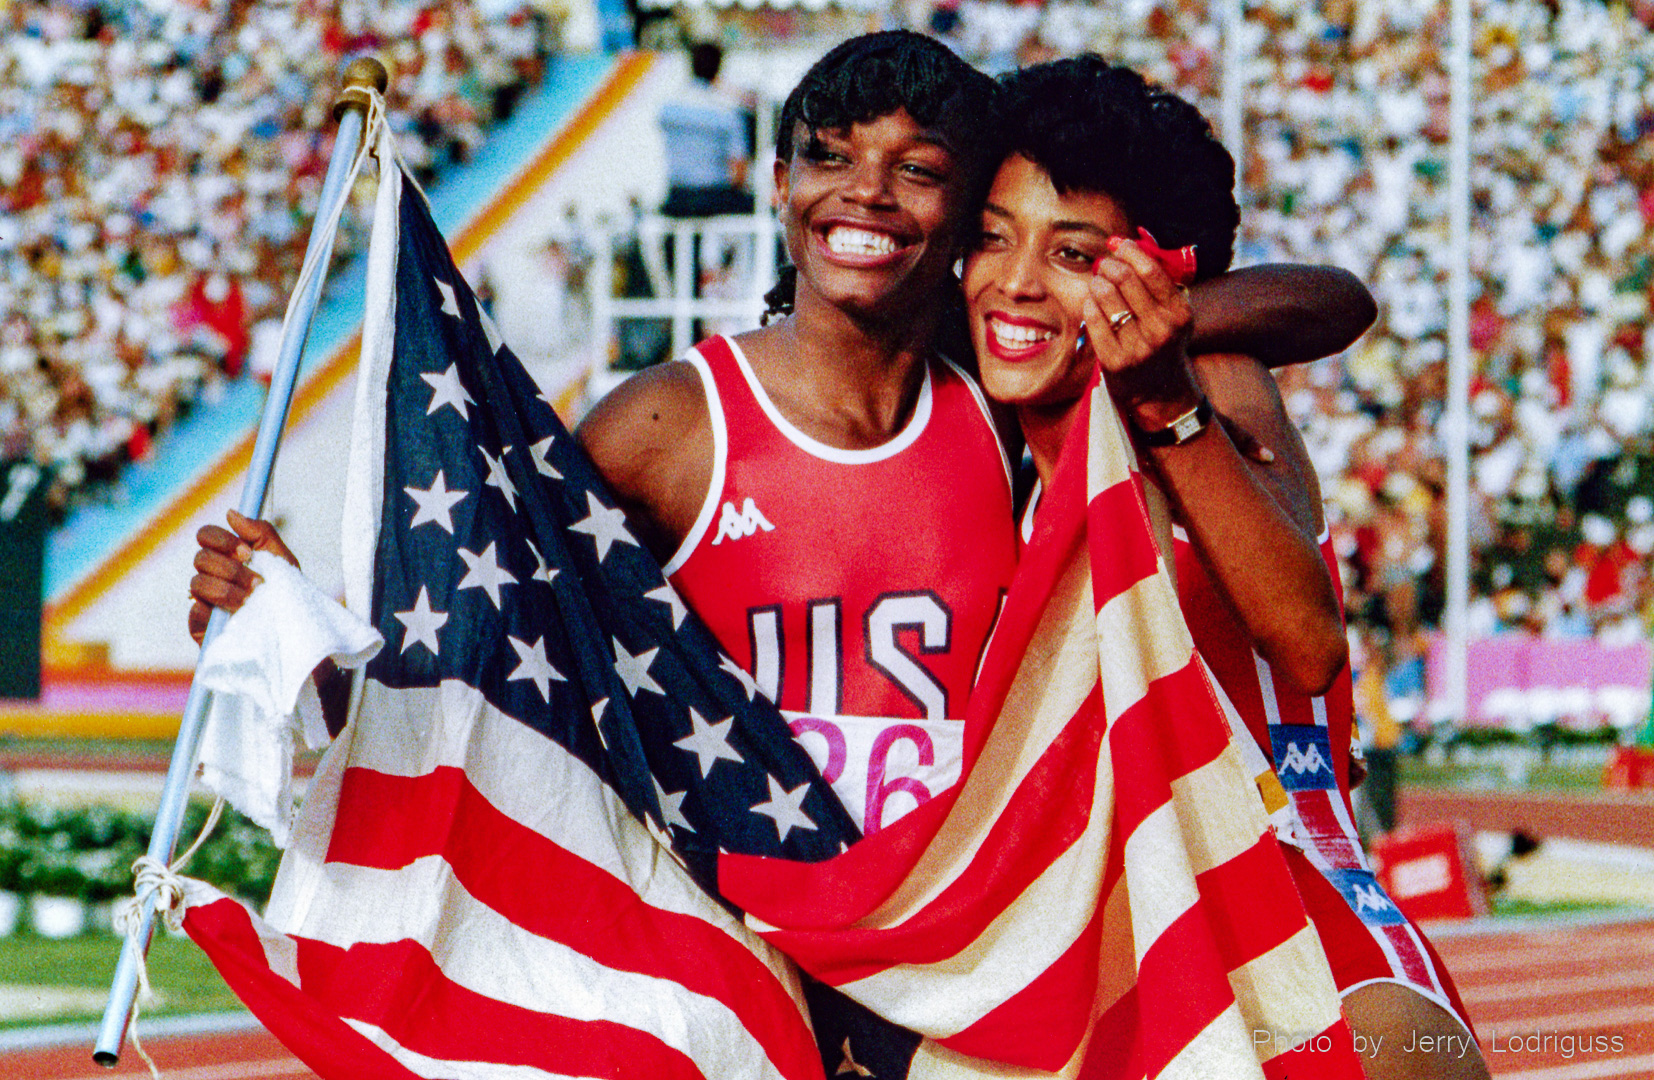 Smiling and laughing, Valerie Brisco-Hooks (left), winner of the gold medal in the 200 meter dash, and teammate Florence Griffith, winner of the silver medal, hold the American flag after the race. The victory gave Brisco-Hooks her second gold medal of the 1984 Olympic Games in Los Angles.